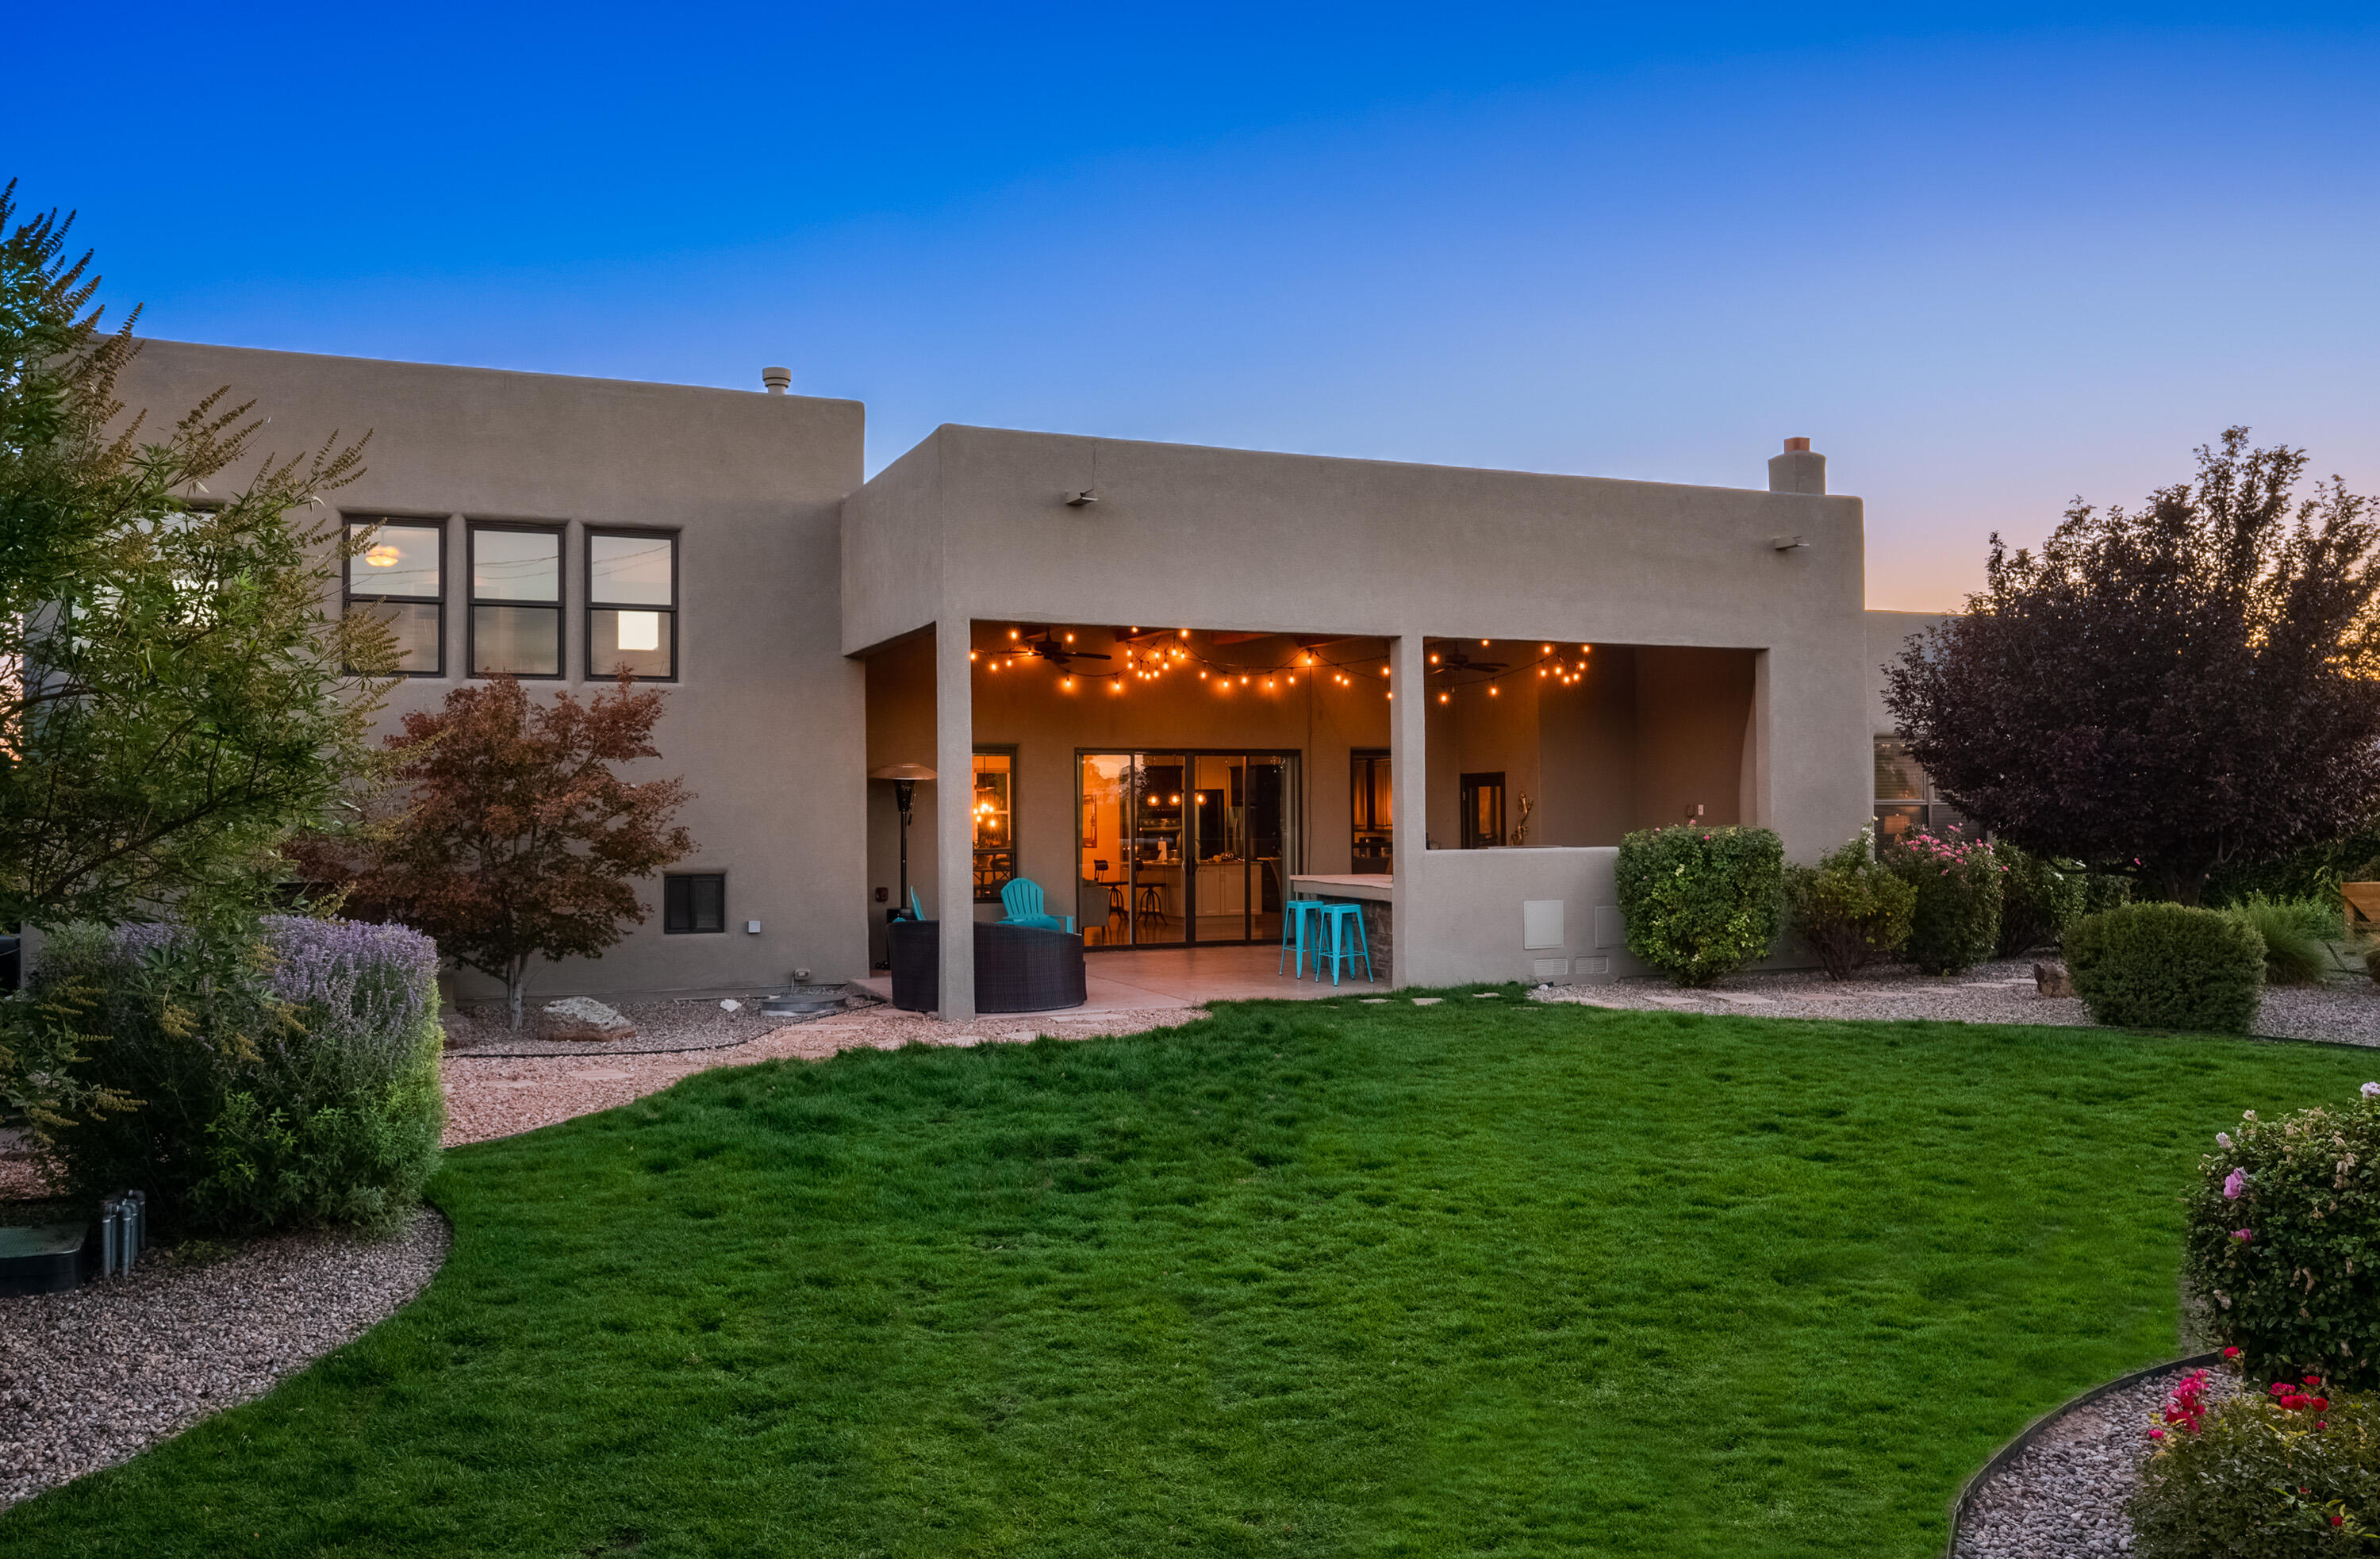 4809 Valle Rio Trail, Albuquerque, New Mexico 87120, 5 Bedrooms Bedrooms, ,4 BathroomsBathrooms,Residential,For Sale,4809 Valle Rio Trail,1042405